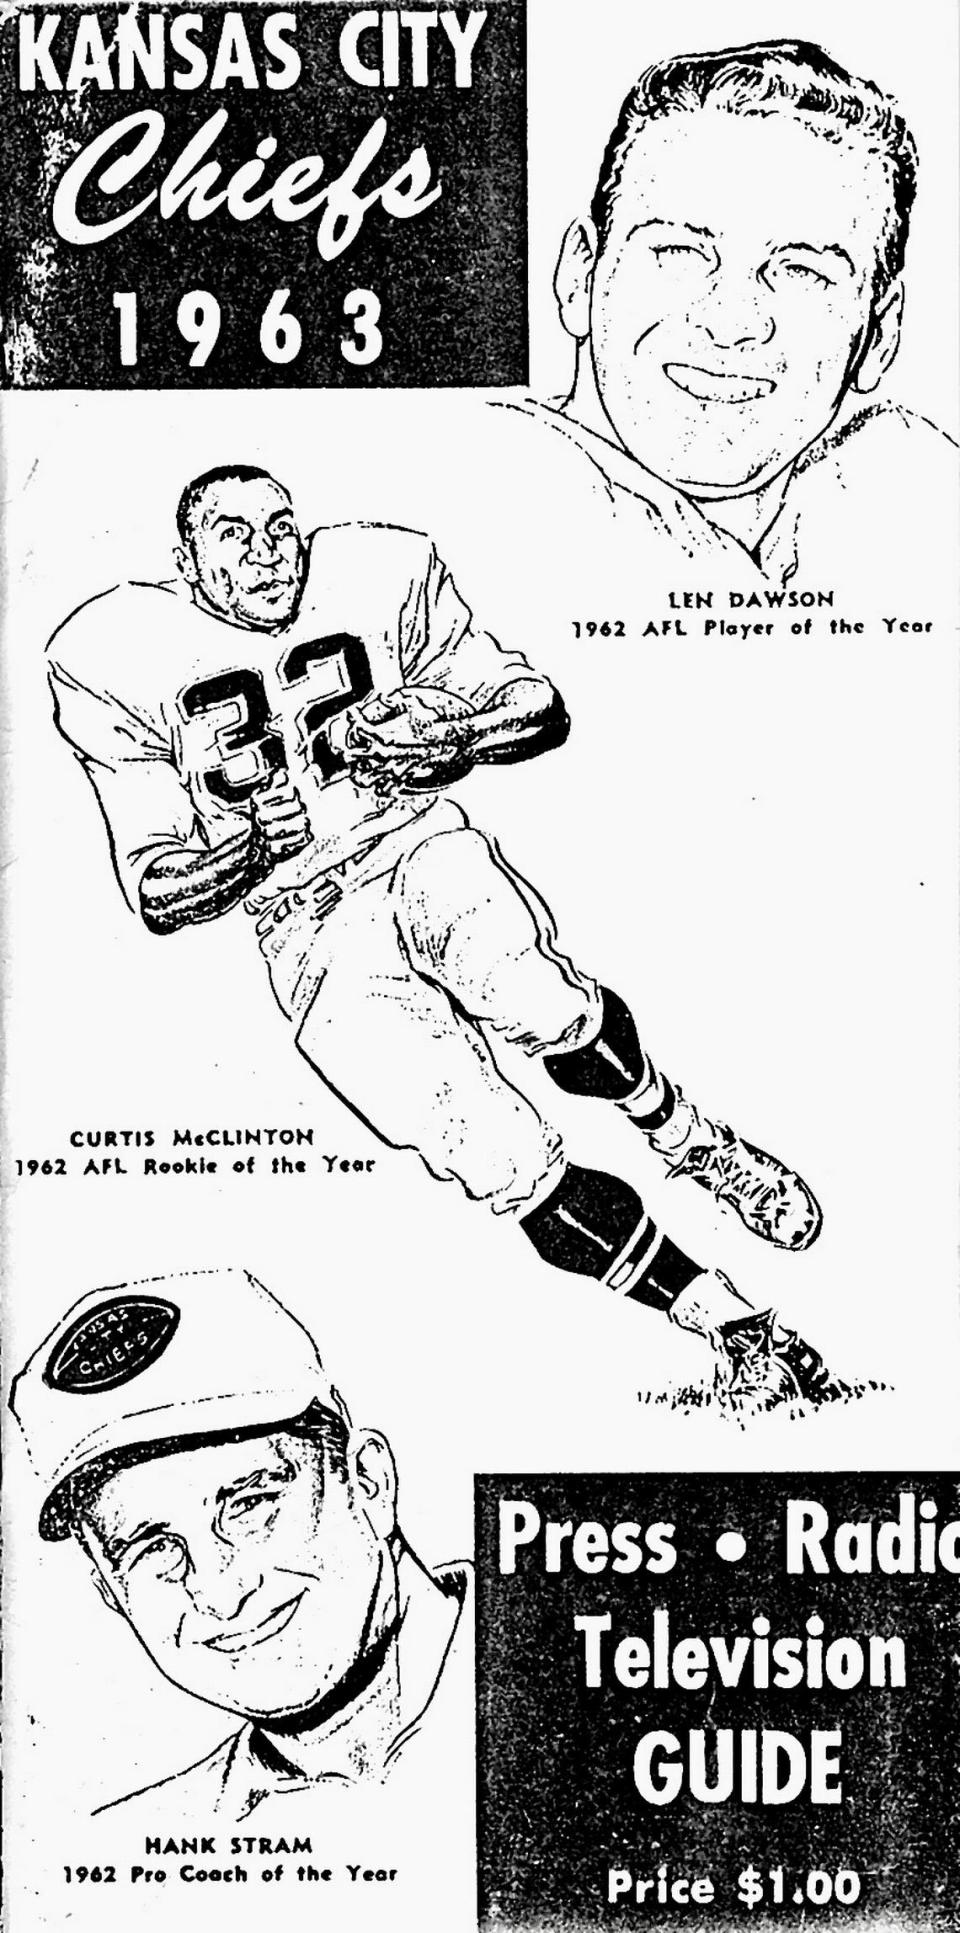 The Chiefs who came to Fort Worth in 1964 were led by Coach Hank Stram, but stars Len Dawson and Curtis McClinton were injured.